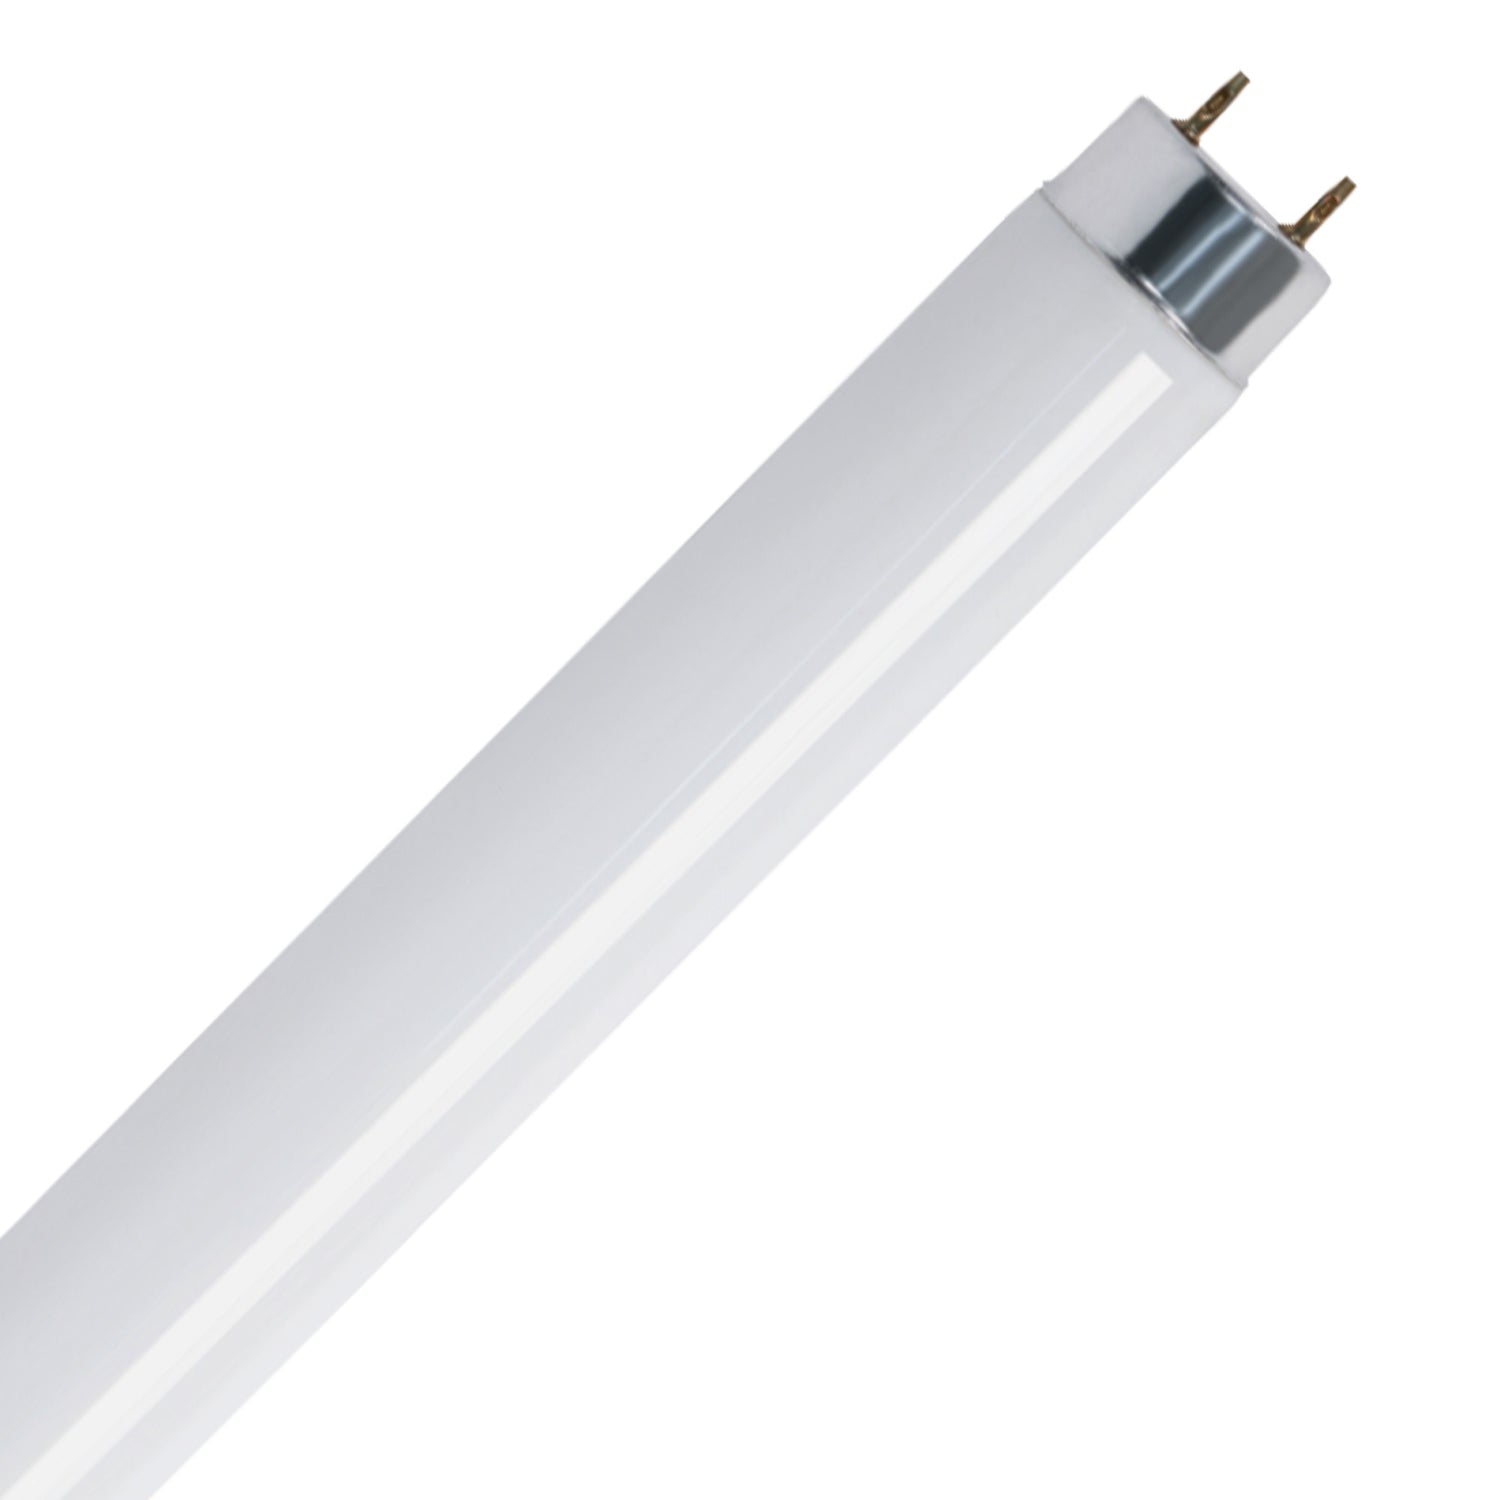 4 ft. 32W Cool White G13 Base (T8 Replacement) Fluorescent Linear Light Tube (2-Pack)